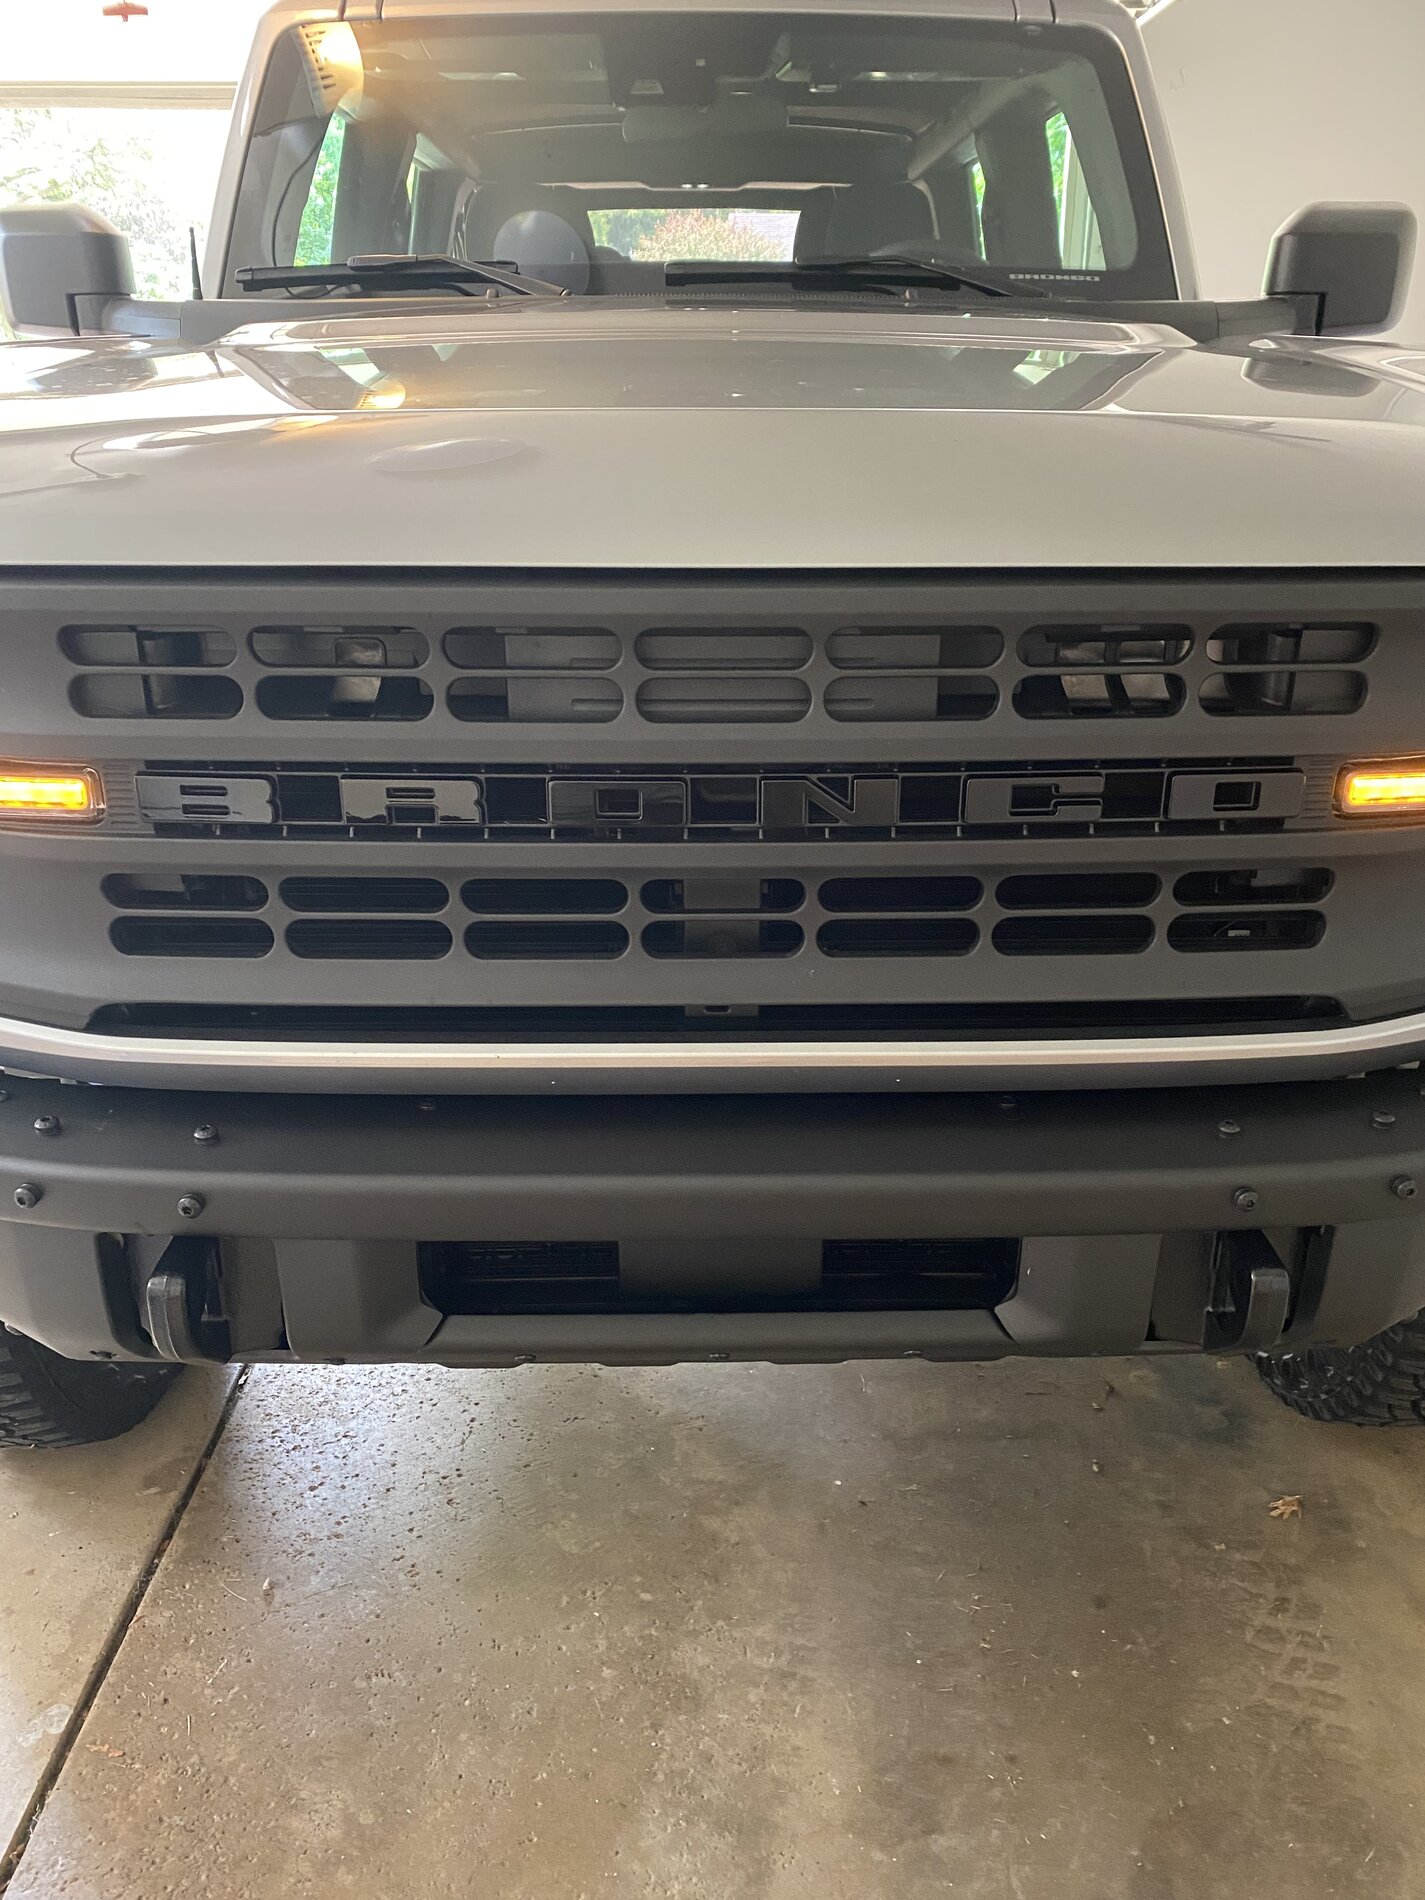 Ford Bronco Grille Swap - Base for BD or OB 9BBA1C8B-0A7D-4B79-8F43-A1238C88F8CF